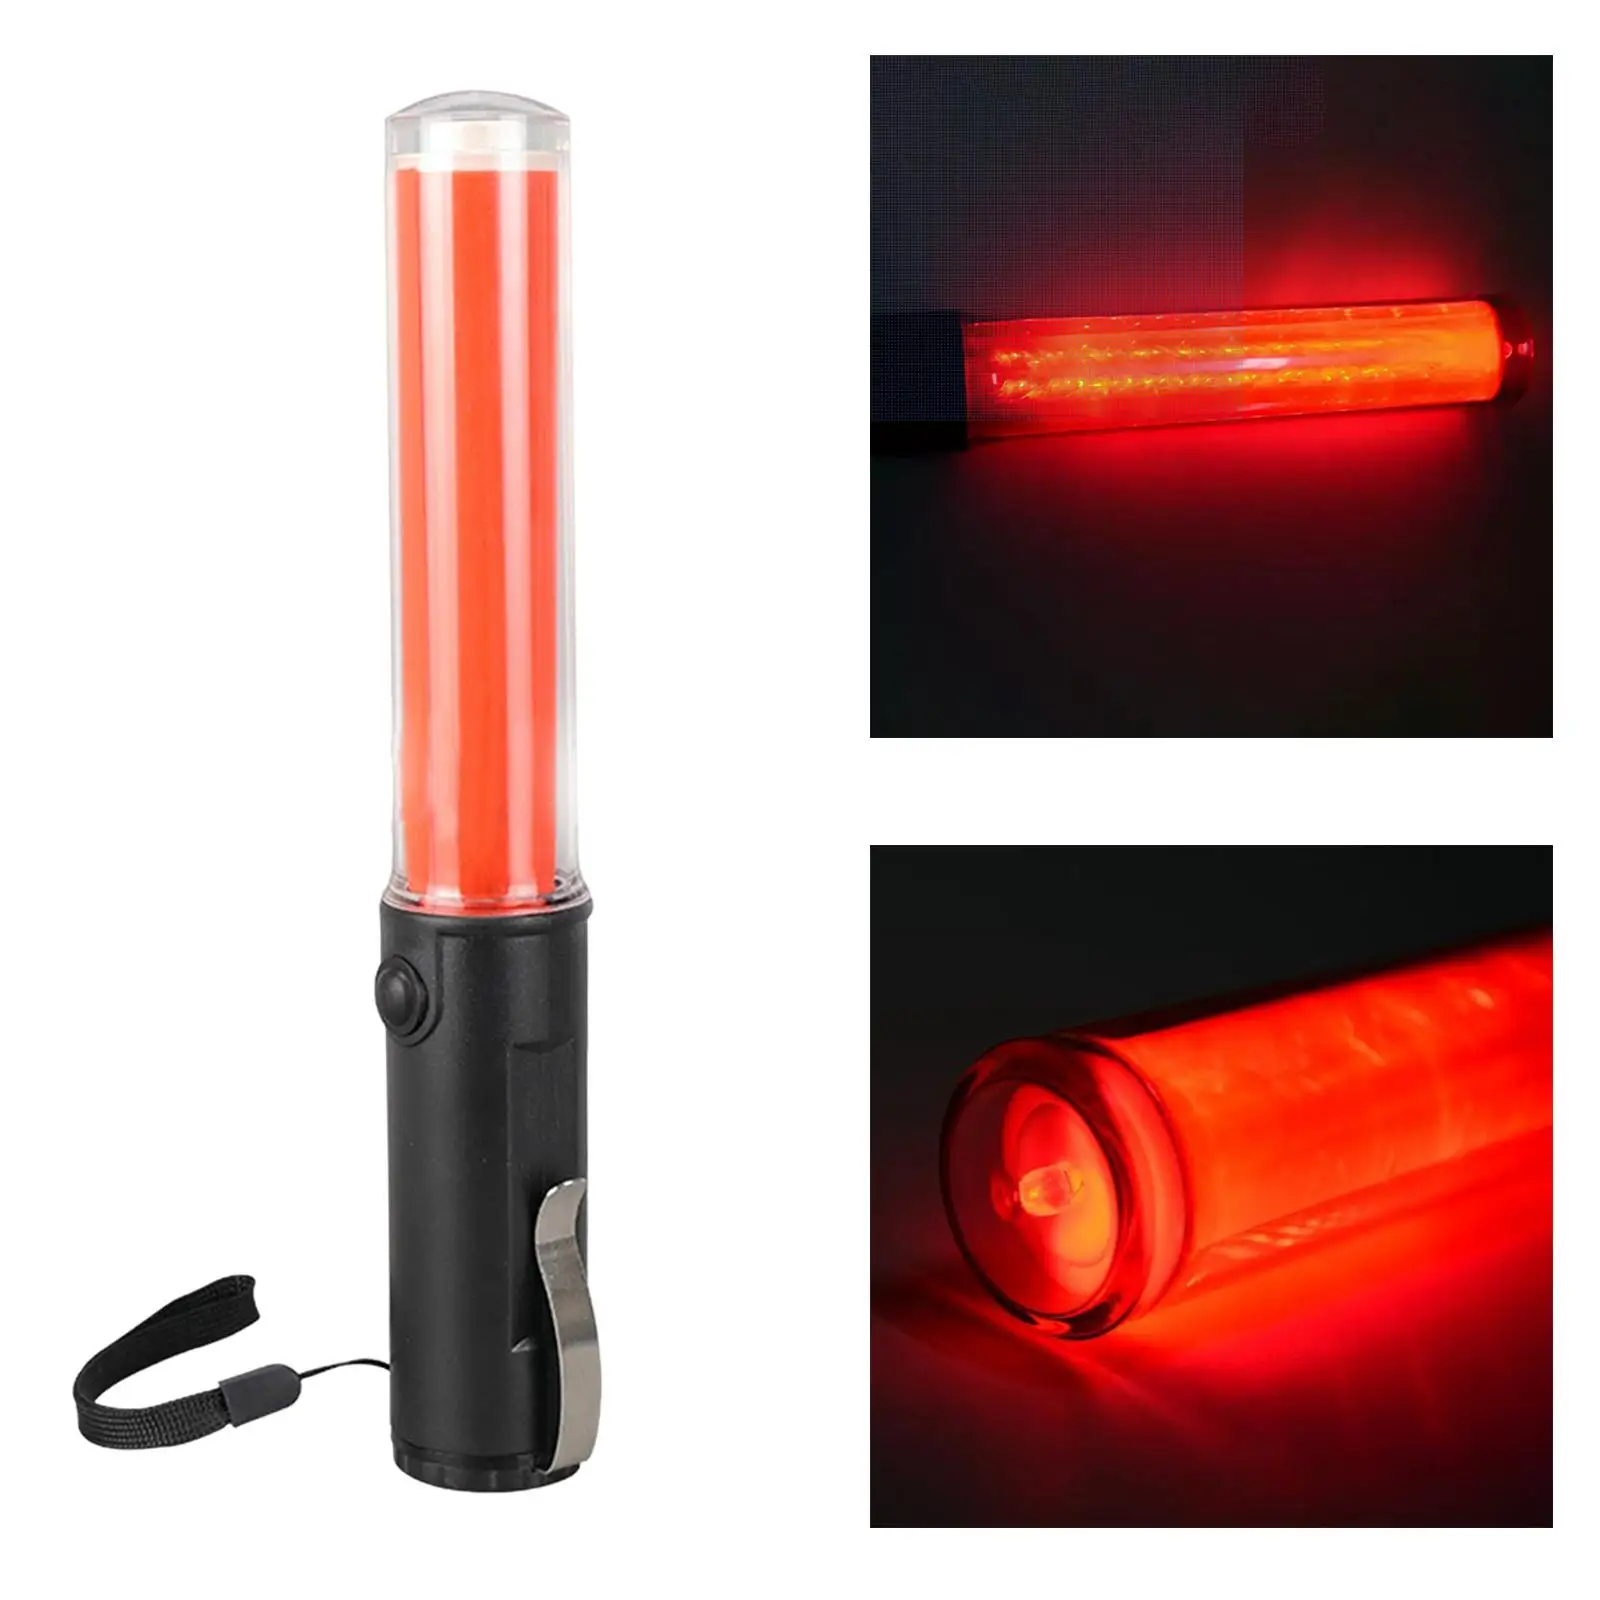 26cm Air Marshaling Signal Wand and Side Clip Design Signal Traffic Wand for Parking Guides LED Traffic Wand 3 Flashing Modes